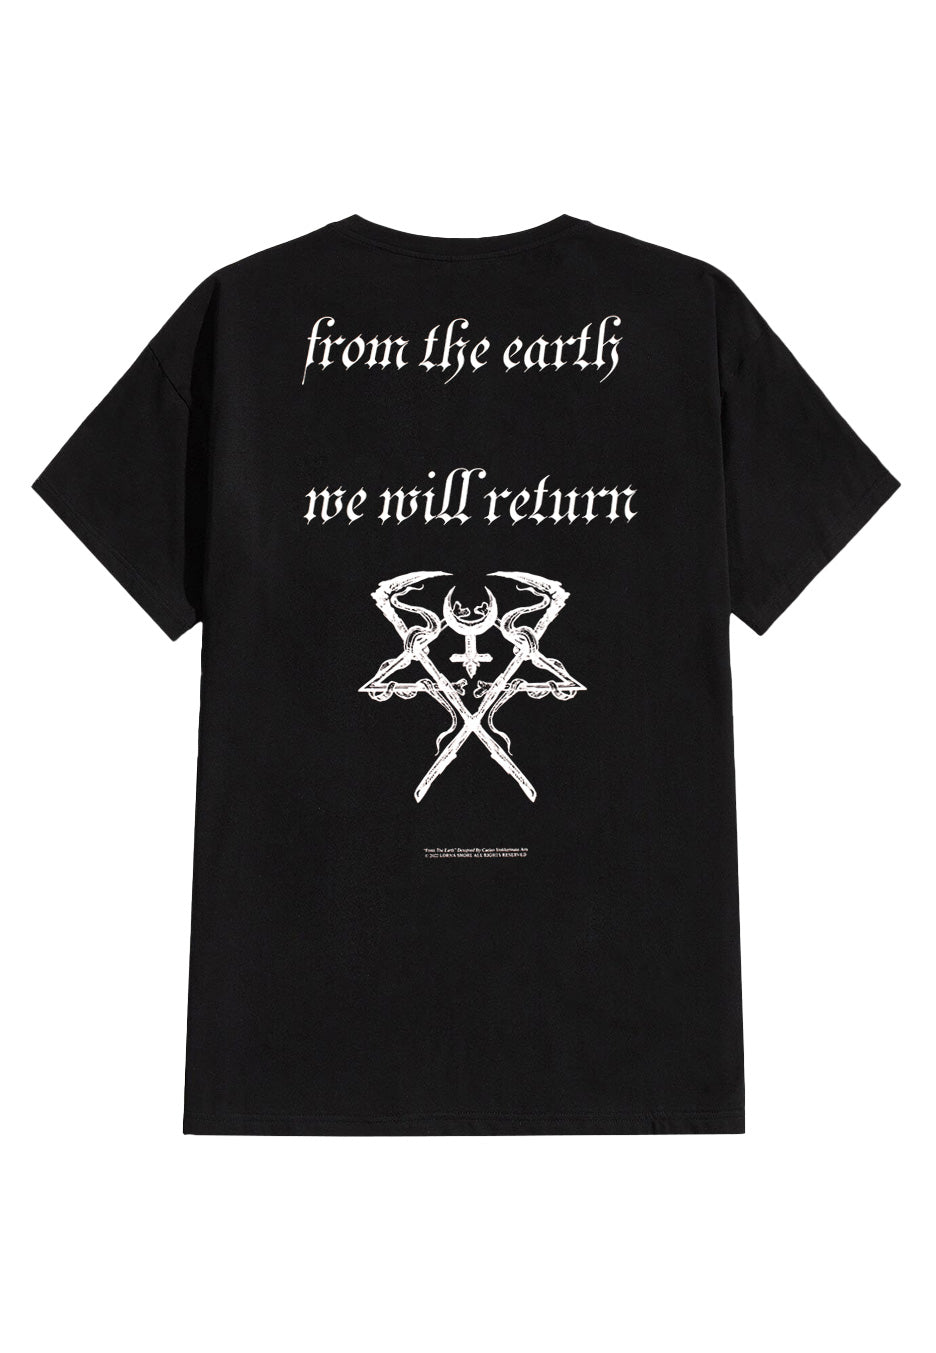 Lorna Shore - New From The Earth - T-Shirt